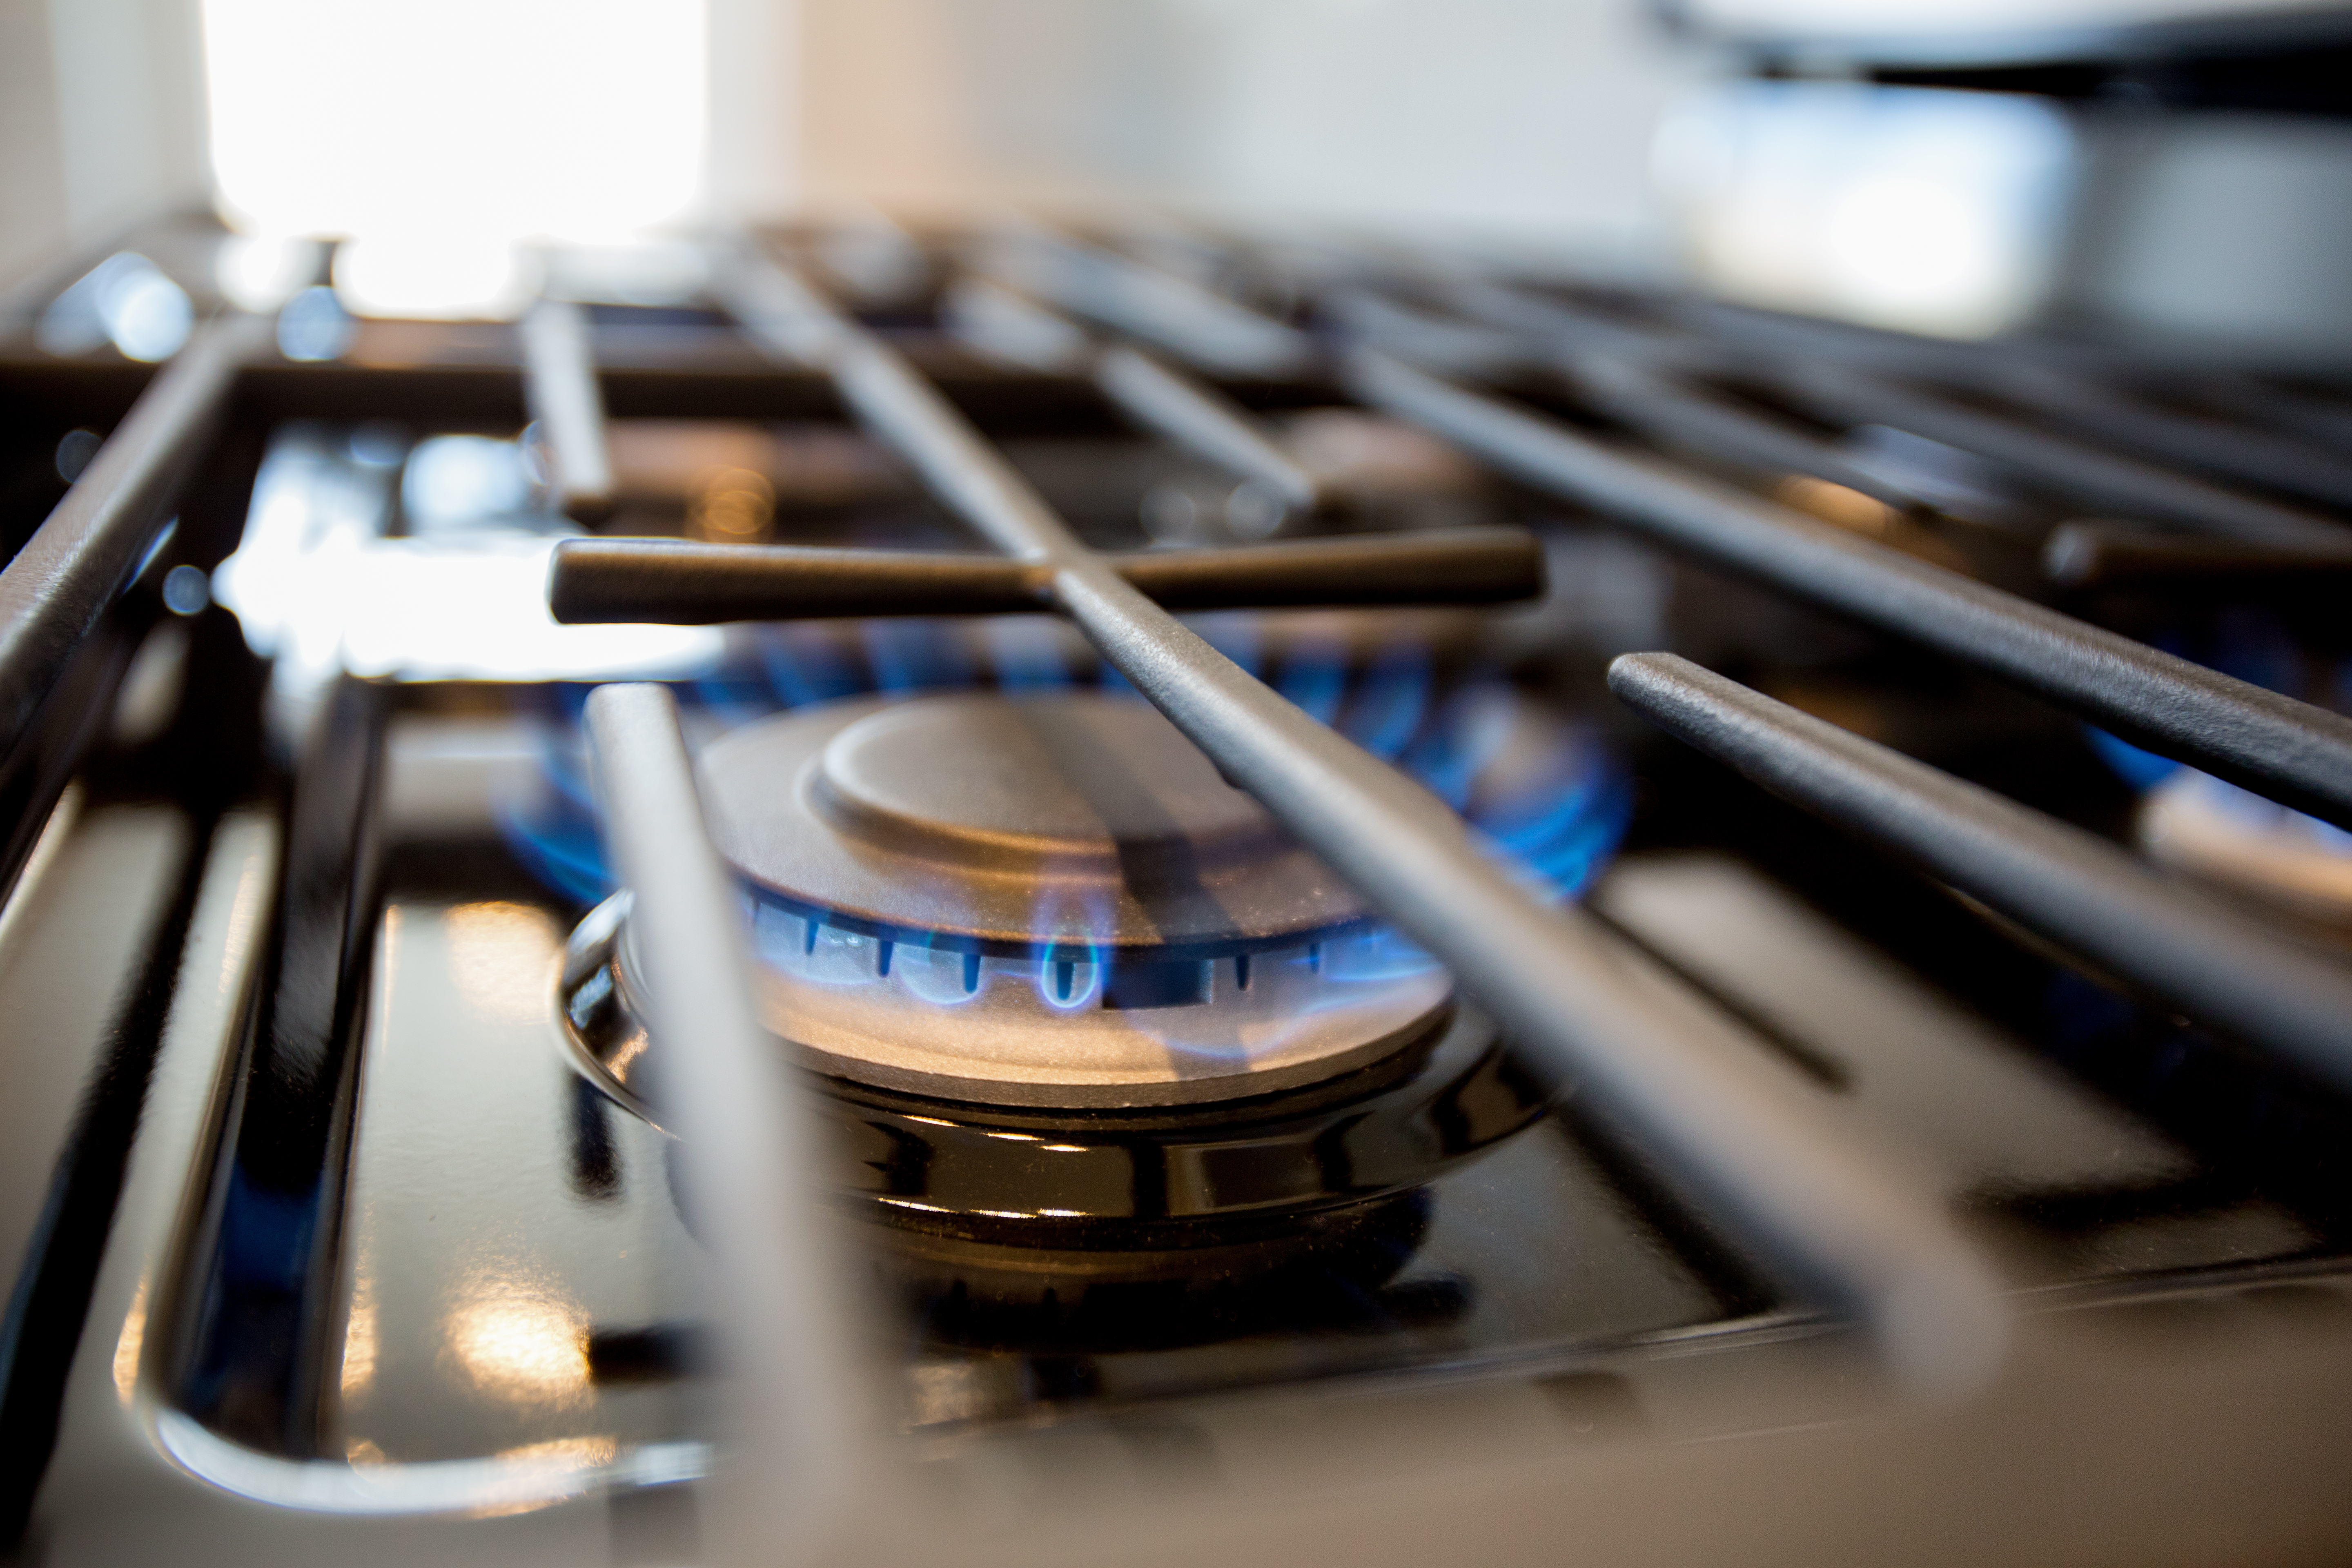 How to Fix a Stove Burner That Won't Light